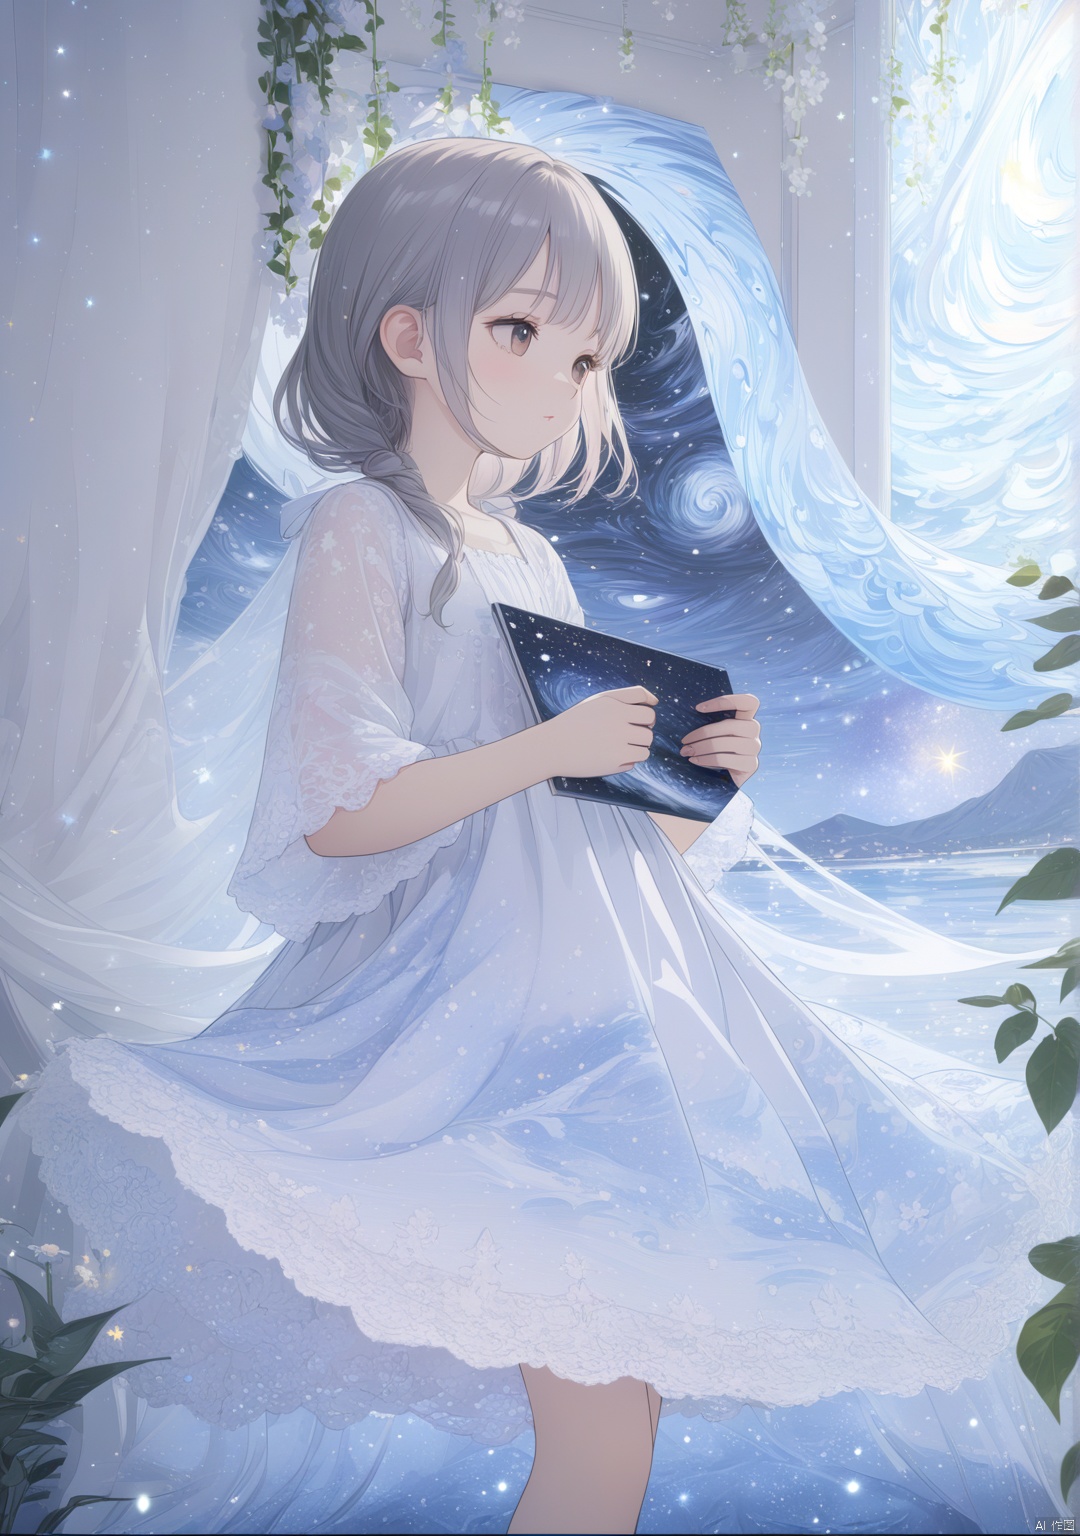 (Masterpiece), (Best Quality), Illustration, Ultra Detailed, HD, Depth of Field, (Color), Illustration, ((Off)), One Girl spxh, fantasy, Beautiful, (Starry Night), dream, health, art, Illustration, Create a fantastic starry background, warm and beautiful, Abstract and realistic, extremely delicate and beautiful, extremely detailed, very detailed, 8k wallpaper, amazing, fine details, best quality, official art, very detailed, CG, Unity, 8k wallpaper, kids illustration style, doodle